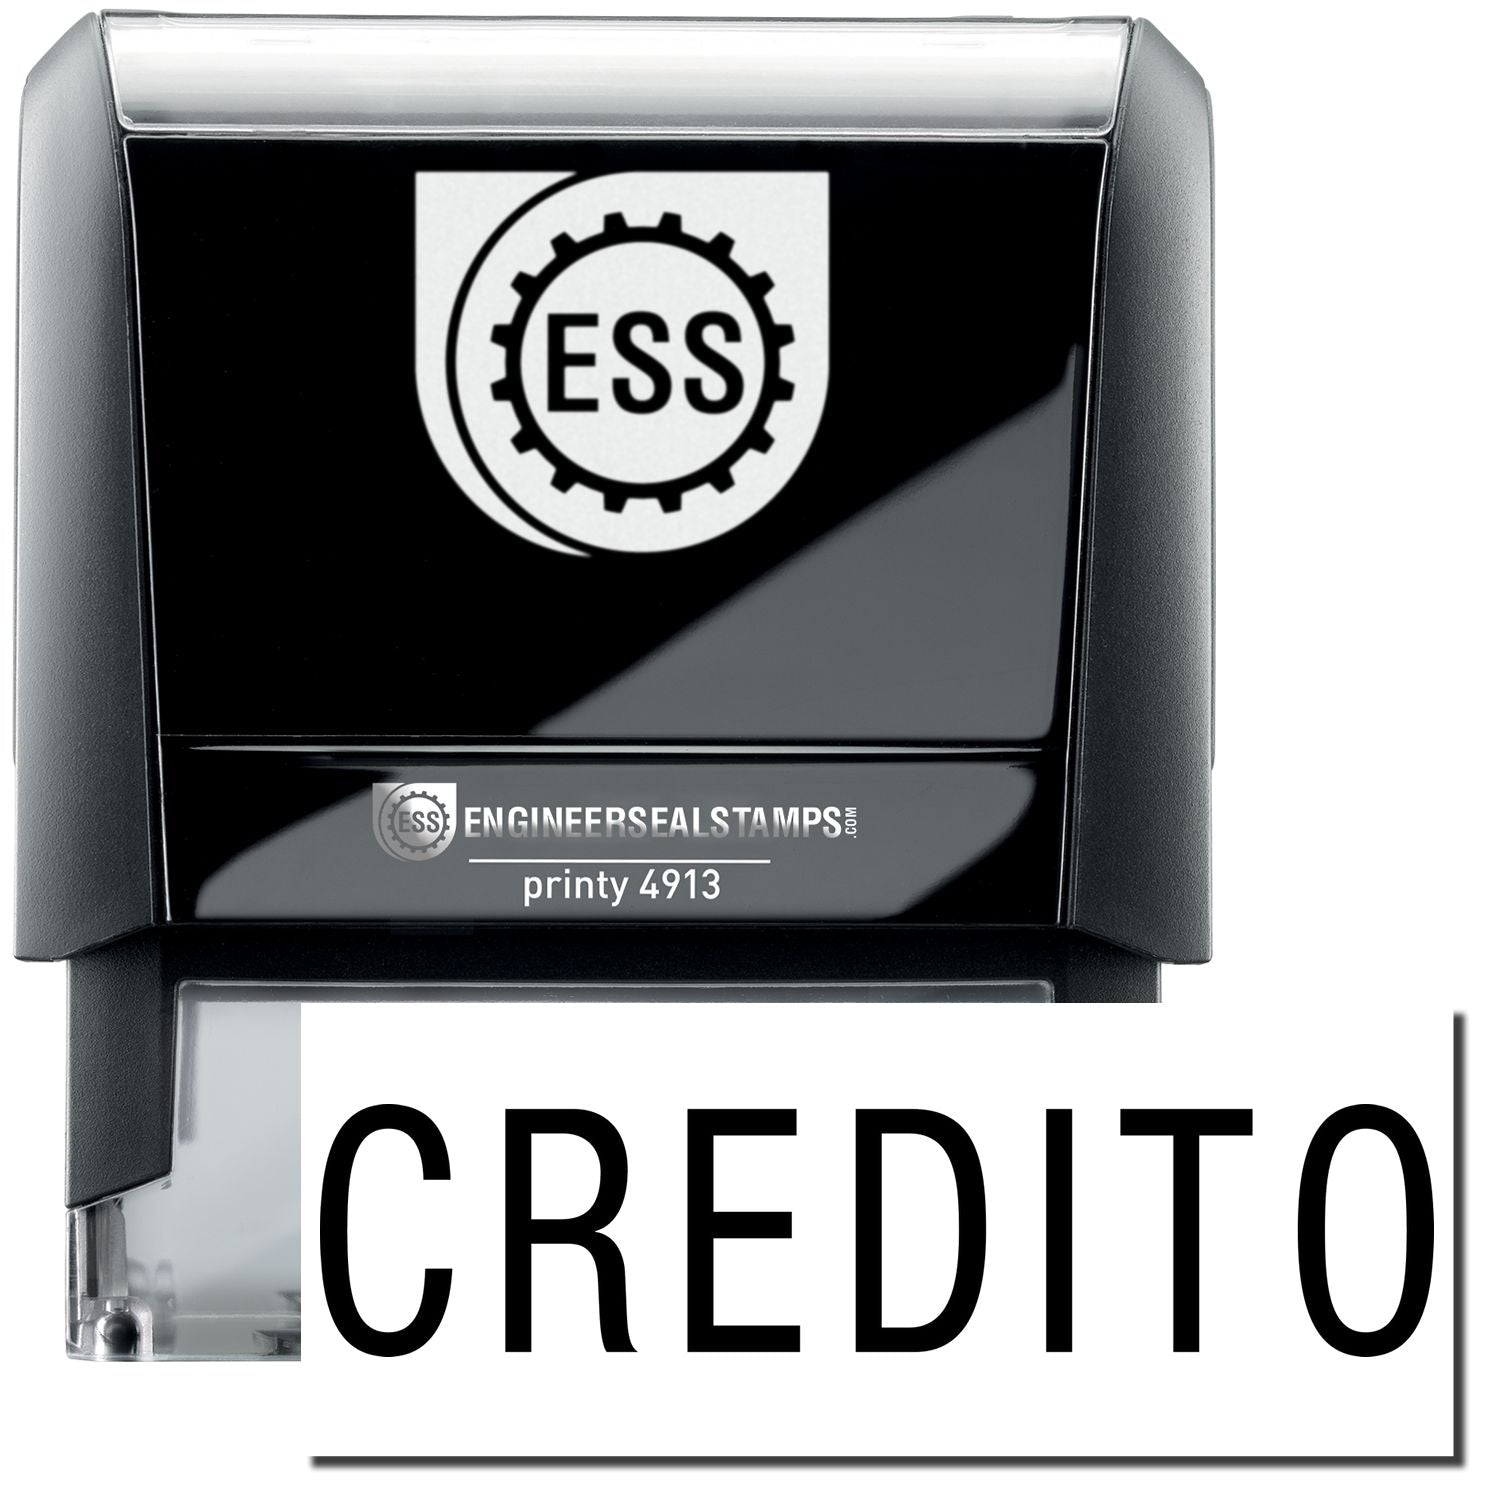 A self-inking stamp with a stamped image showing how the text "CREDITO" in a large font is displayed by it after stamping.